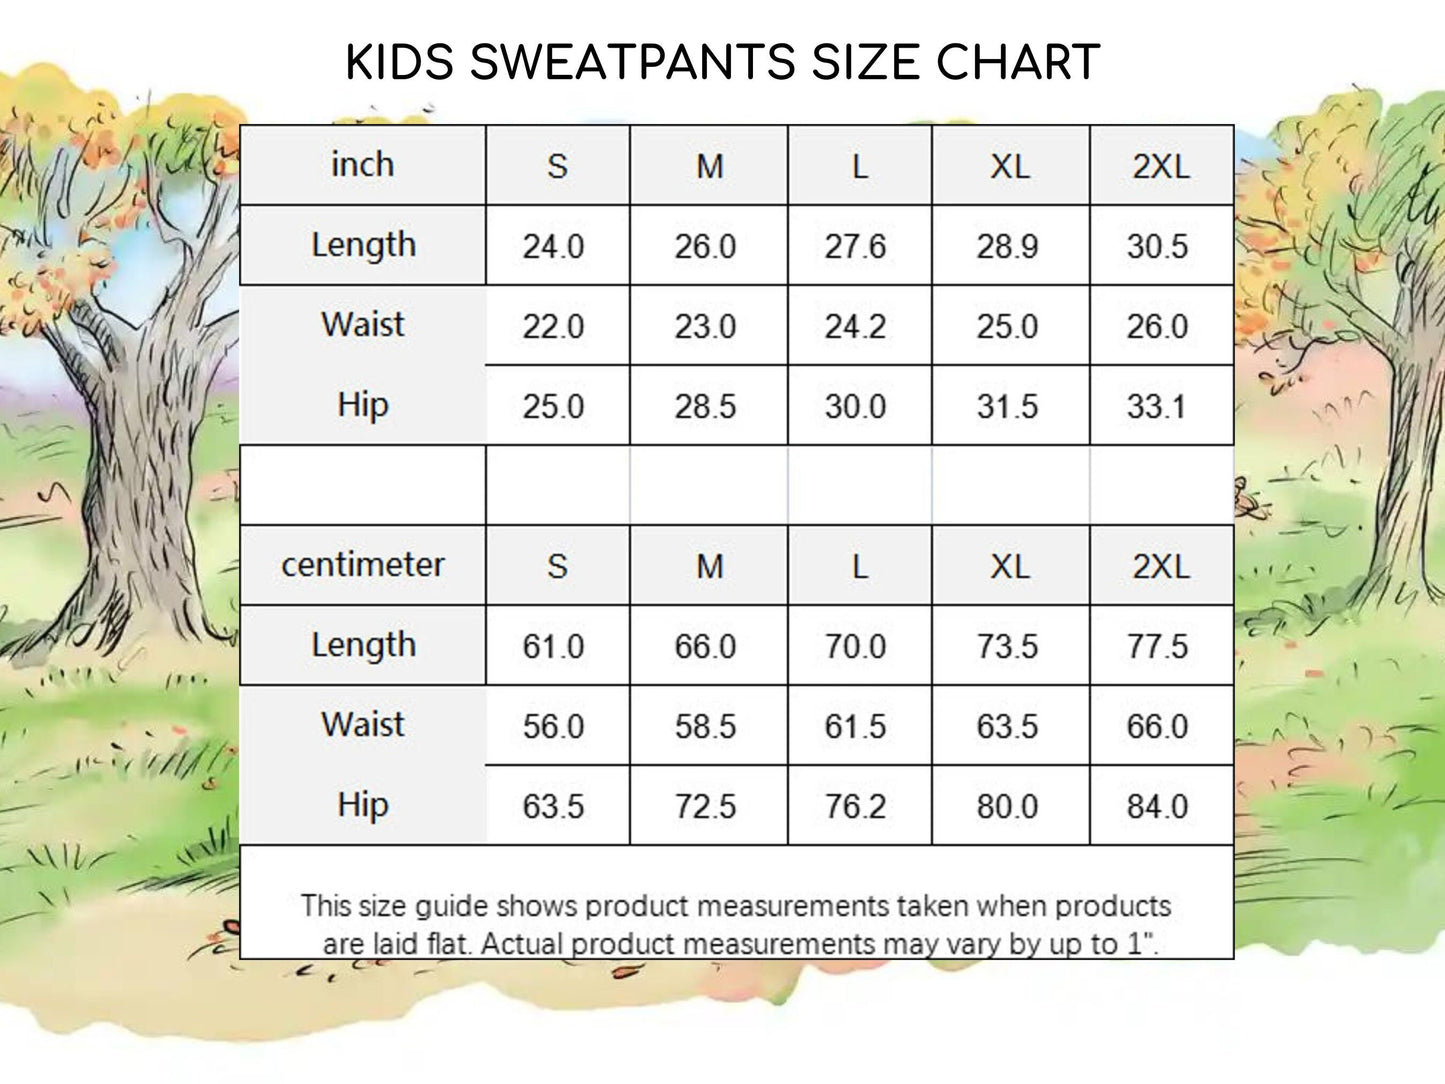 Winnie the Pooh Vintage Style Tigger Set Kids, Hoodie with Ears, Leggings Sweatpants, Gift for Her, Gift for Him, Halloween Costumes Cosplay